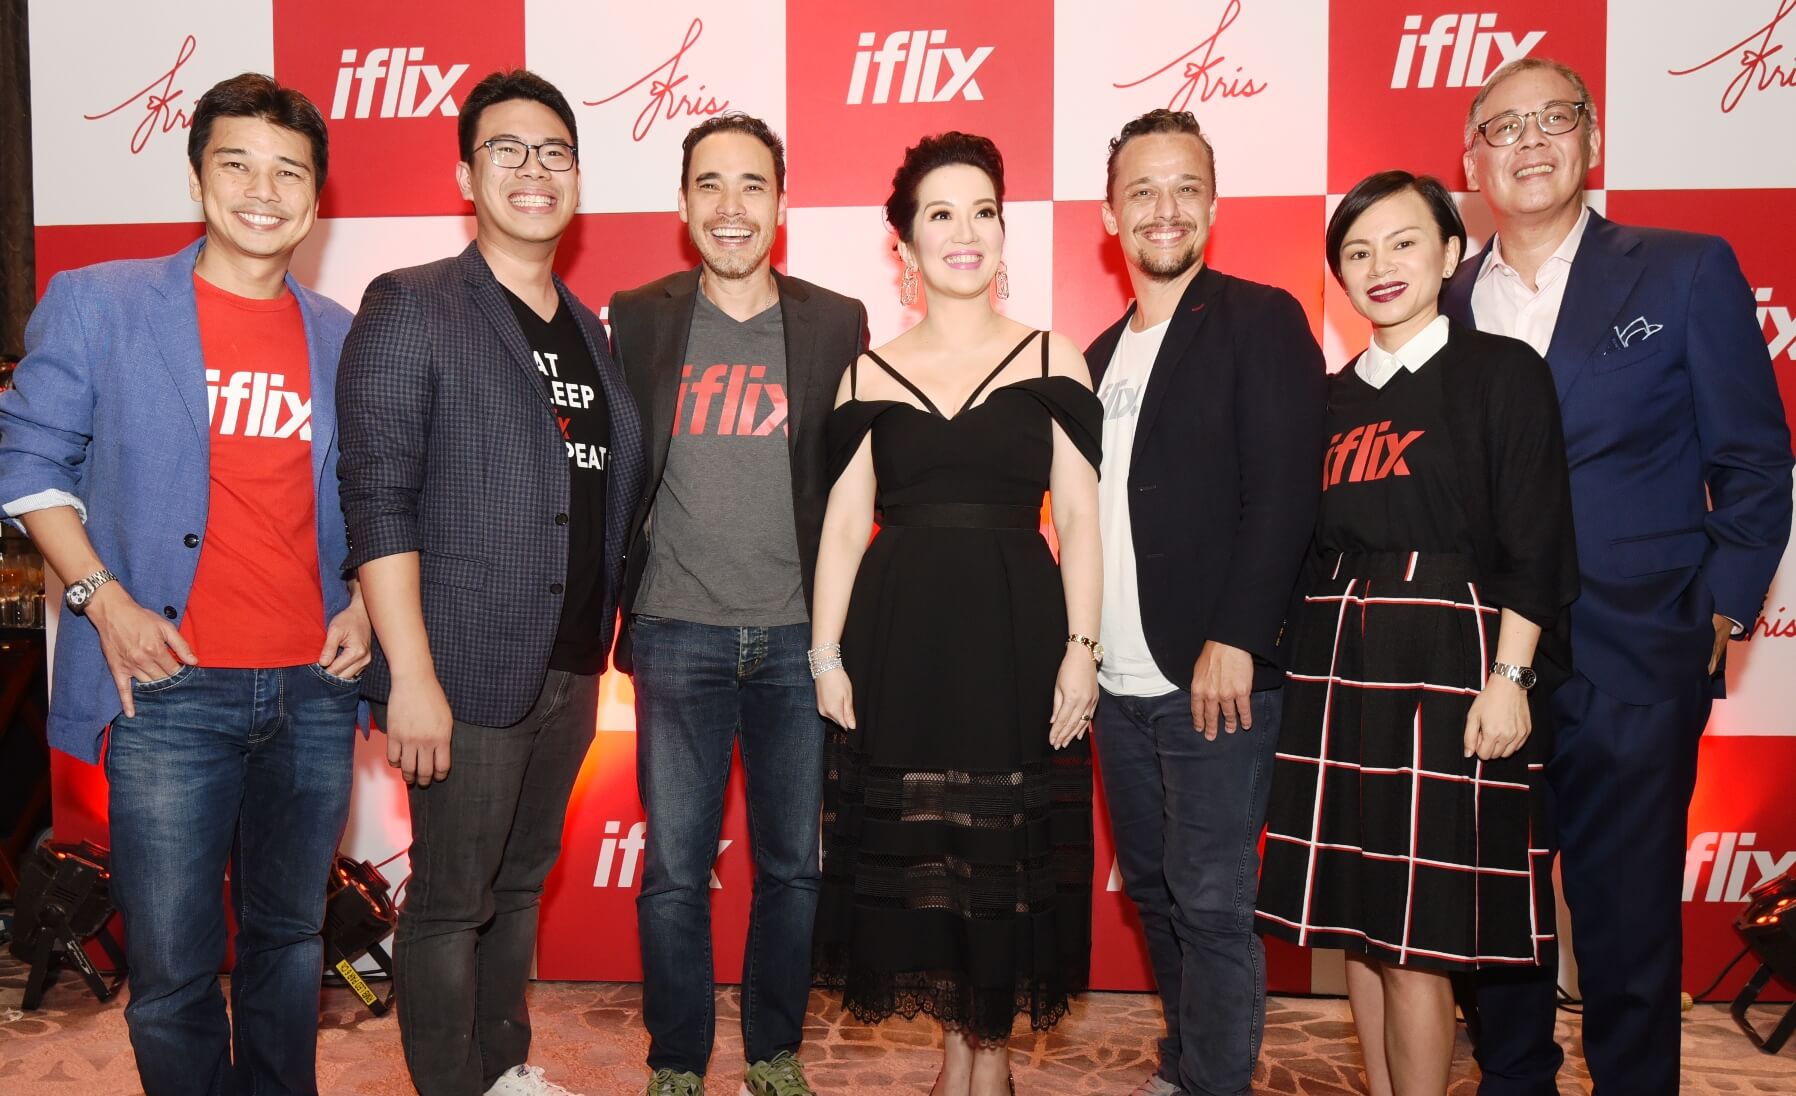 PLDT Home Subscribers Can Now Enjoy Unlimited Access to Iflix